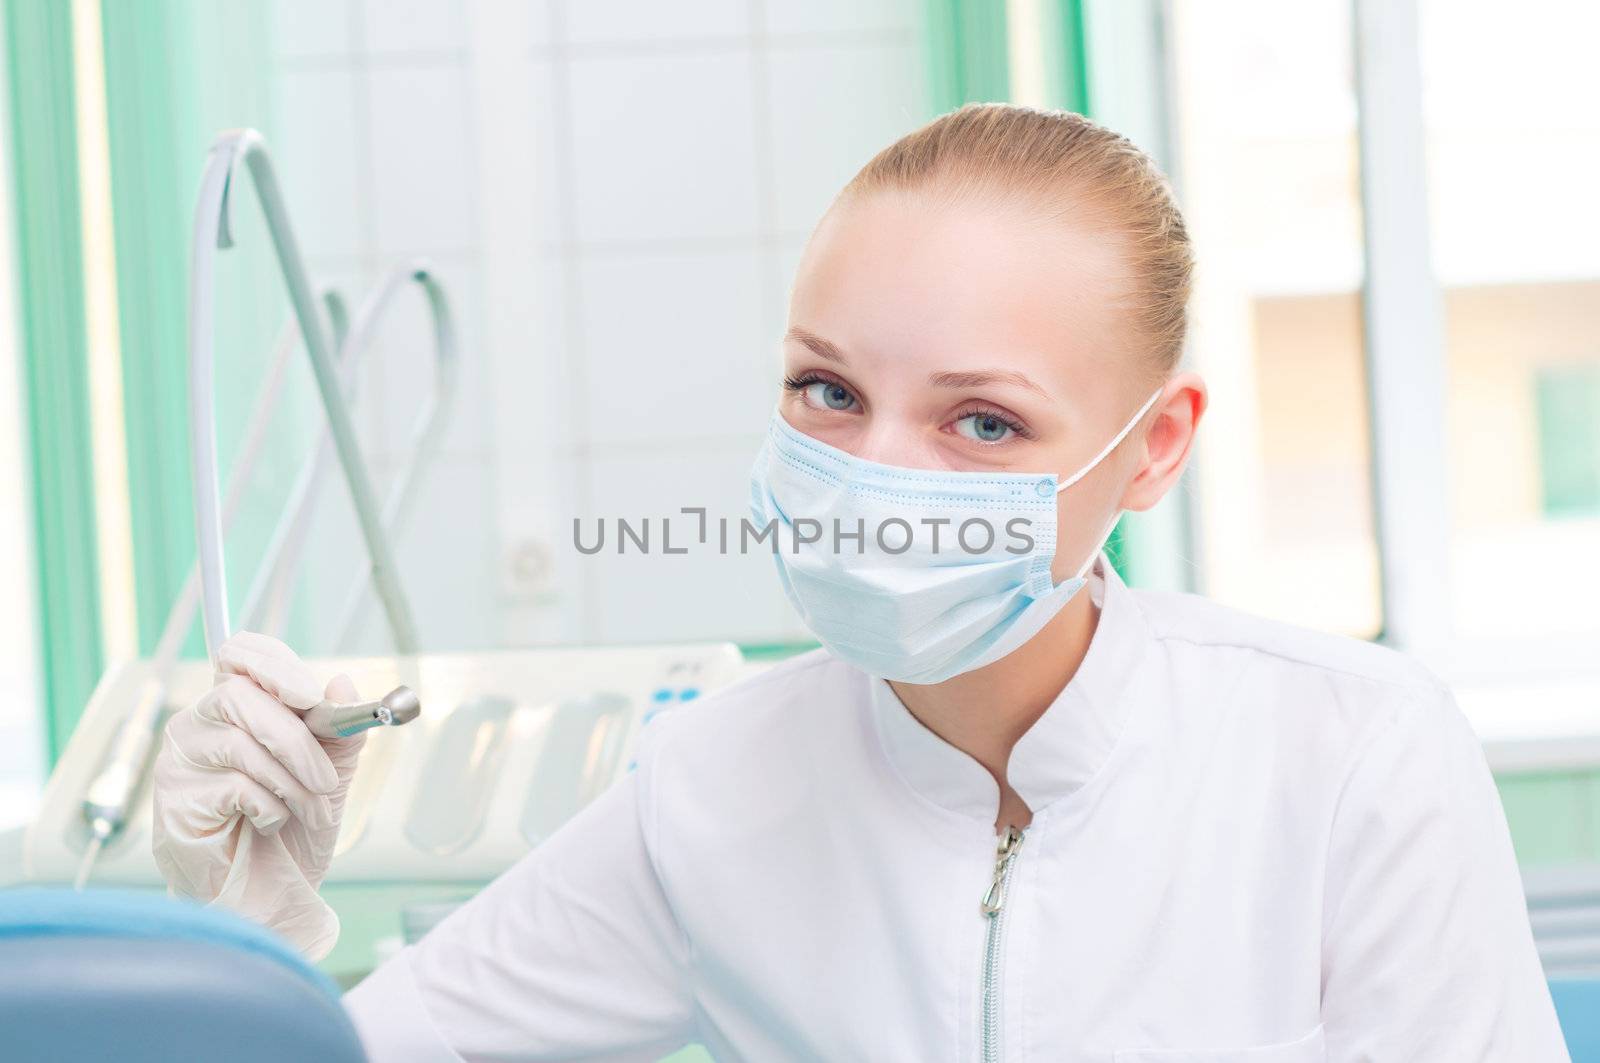 female dentists in protective mask holds a dental drill, the doctors at work